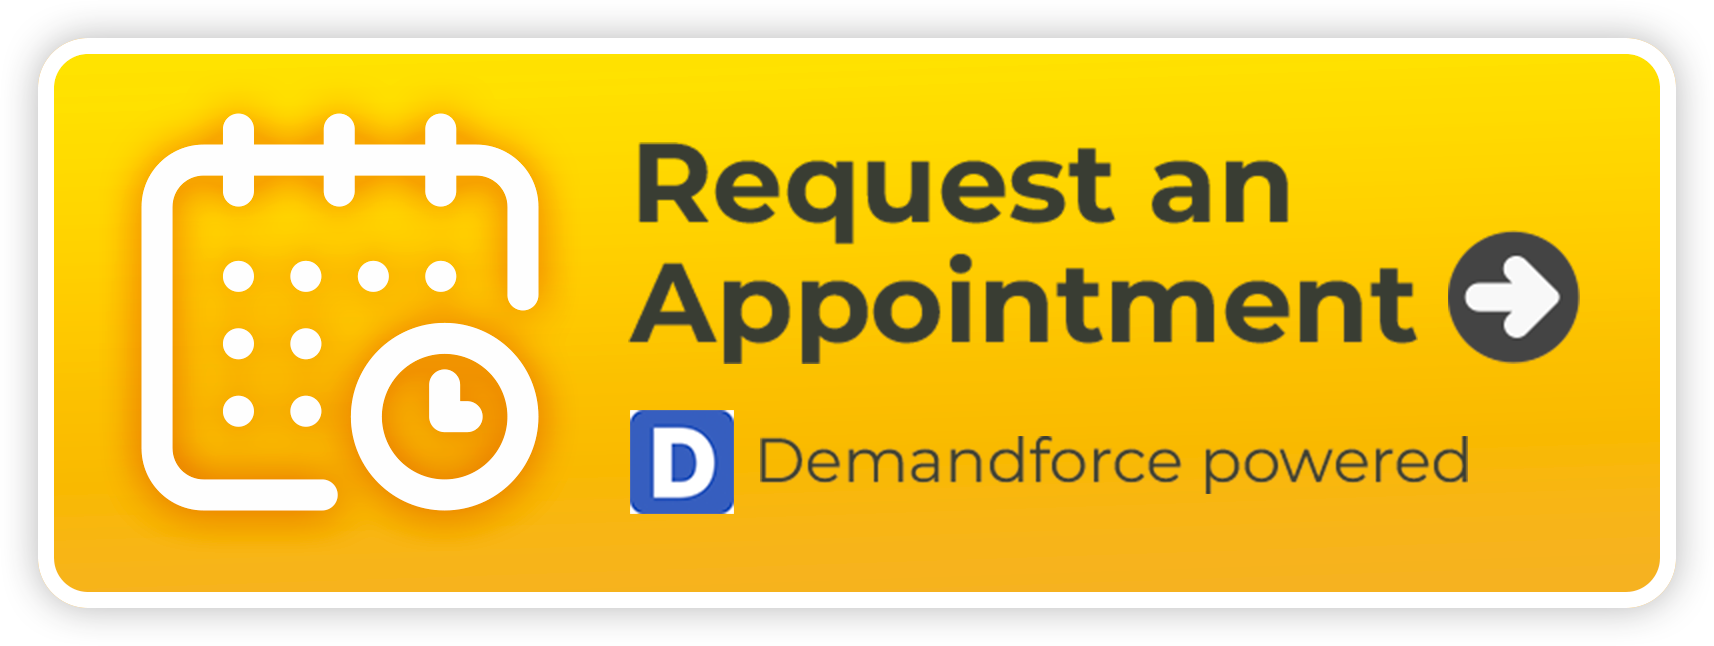 Request an Appointment - Demandforce powered